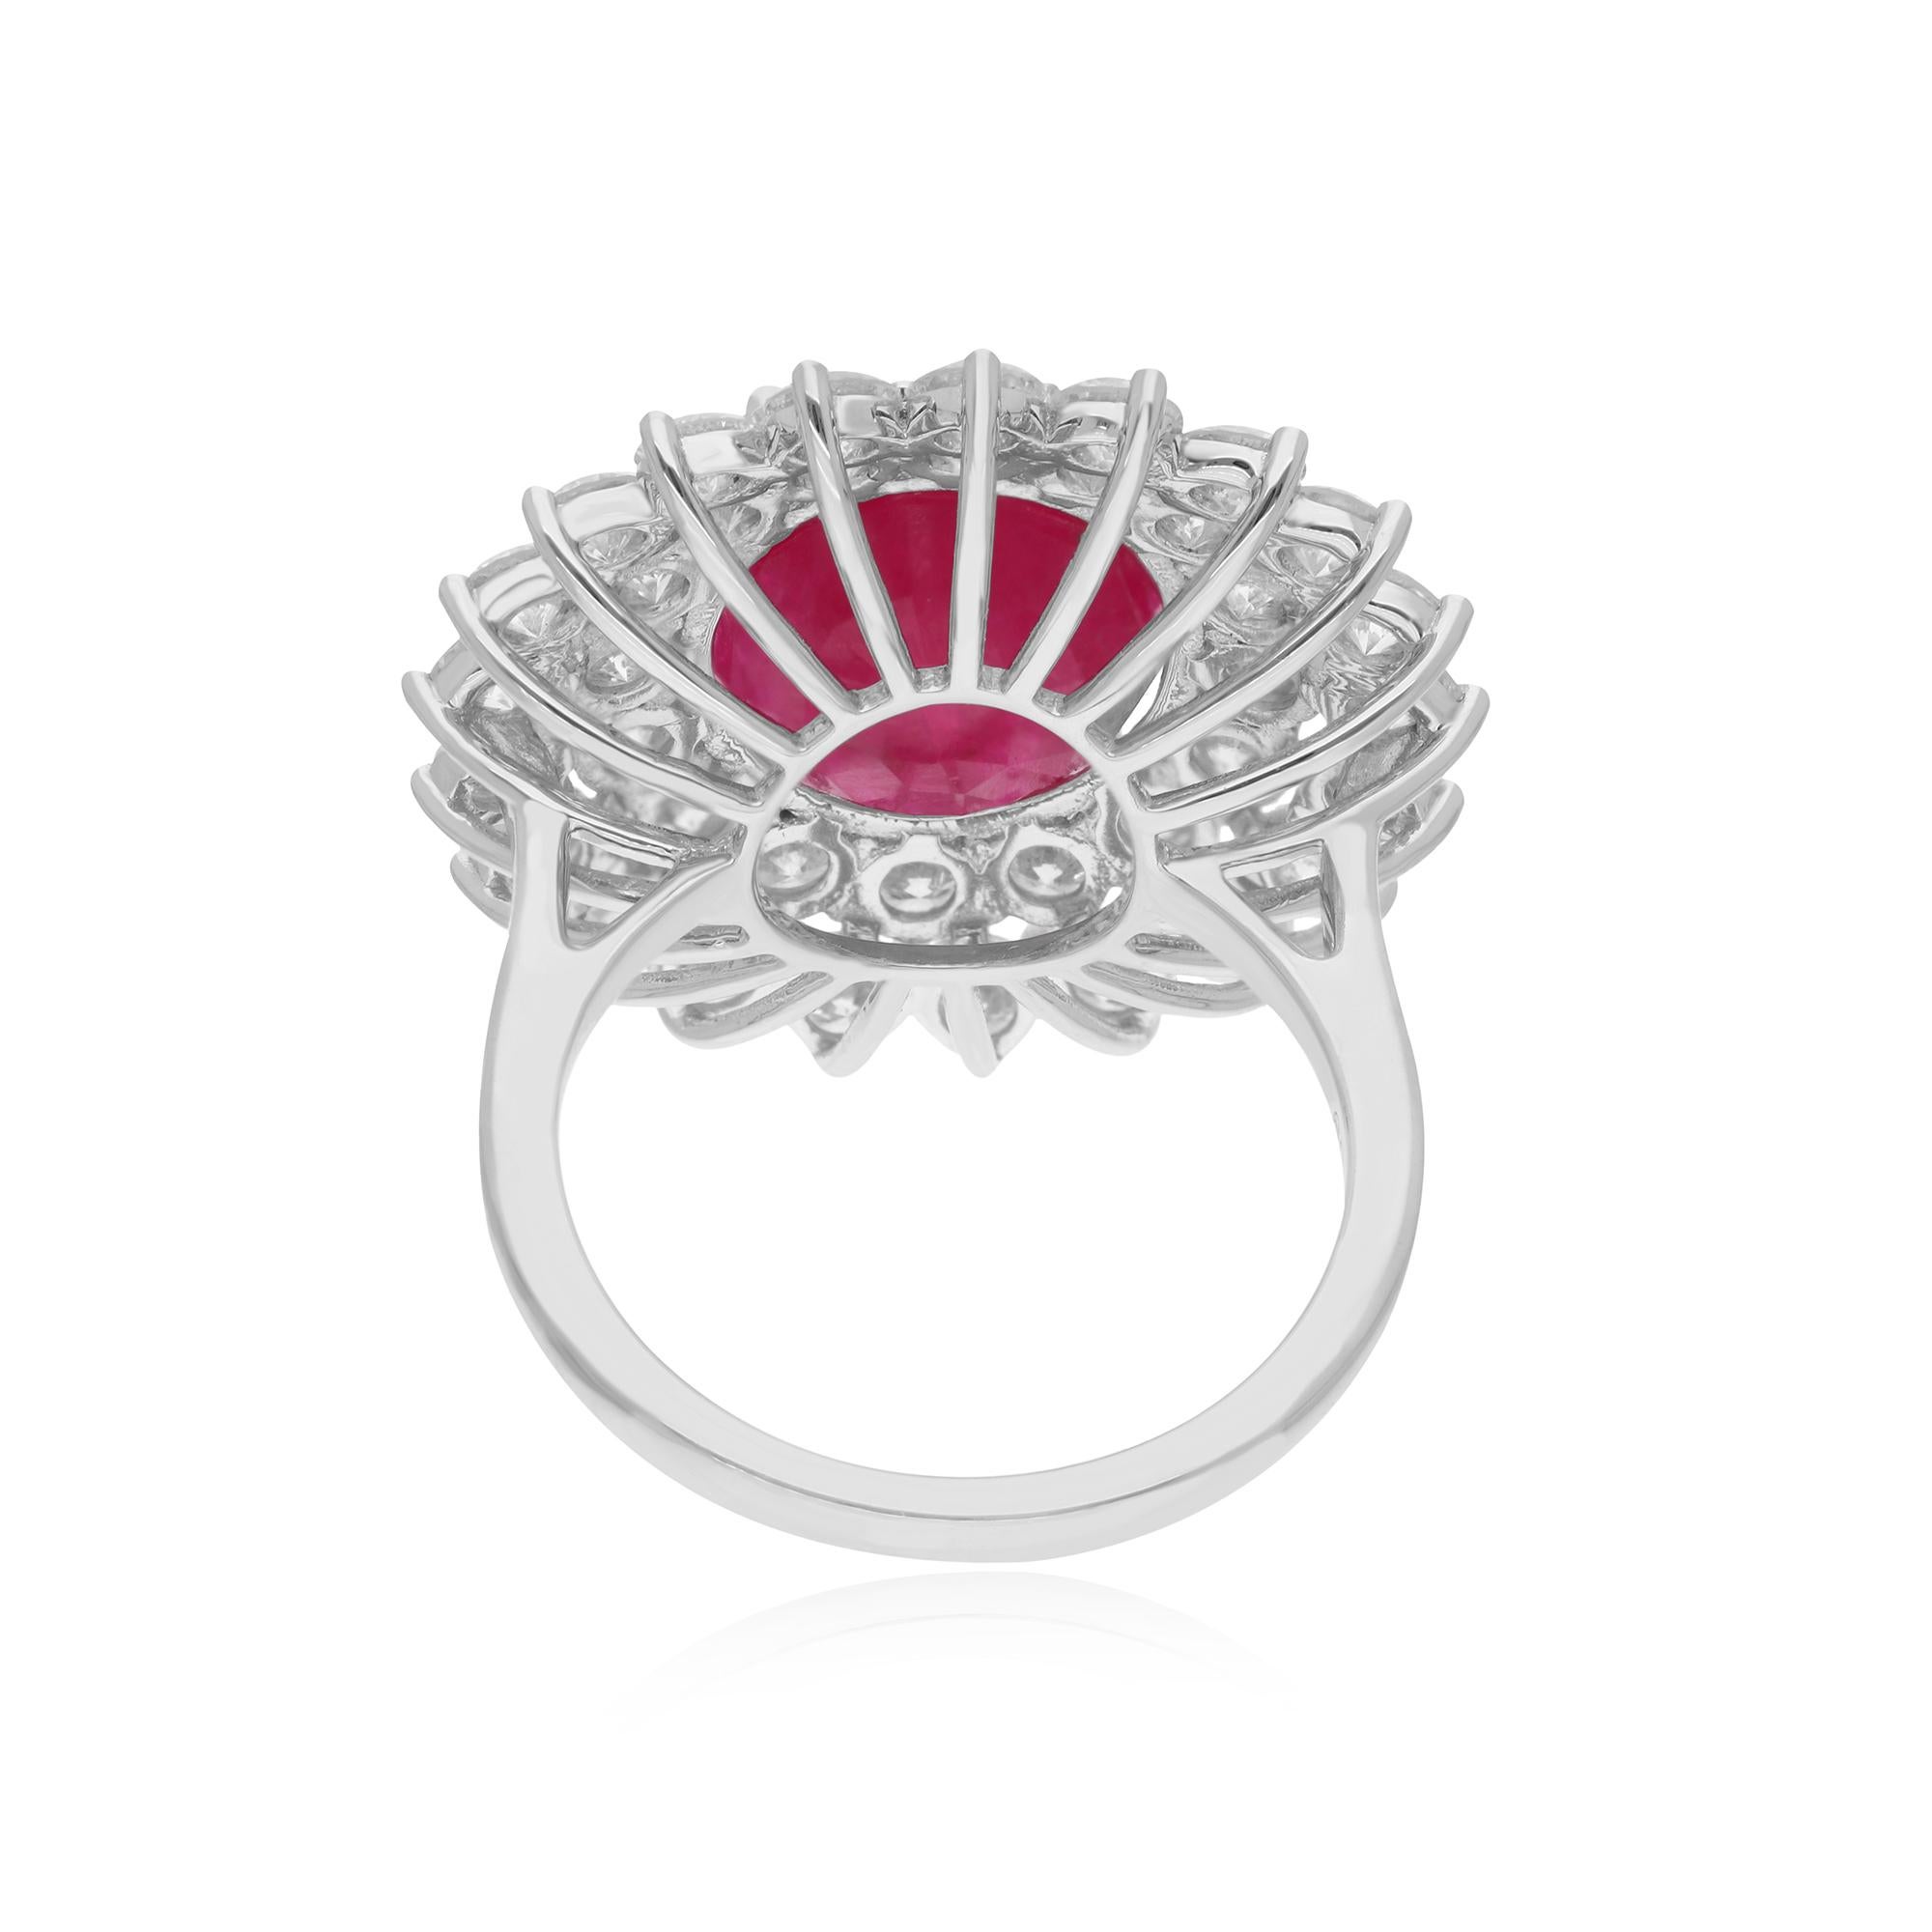 Indulge in the timeless allure of this Natural Ruby Gemstone Cocktail Ring, adorned with shimmering diamonds and meticulously handcrafted in luxurious 18 karat white gold. This exquisite piece of handmade jewelry is a true symbol of elegance and